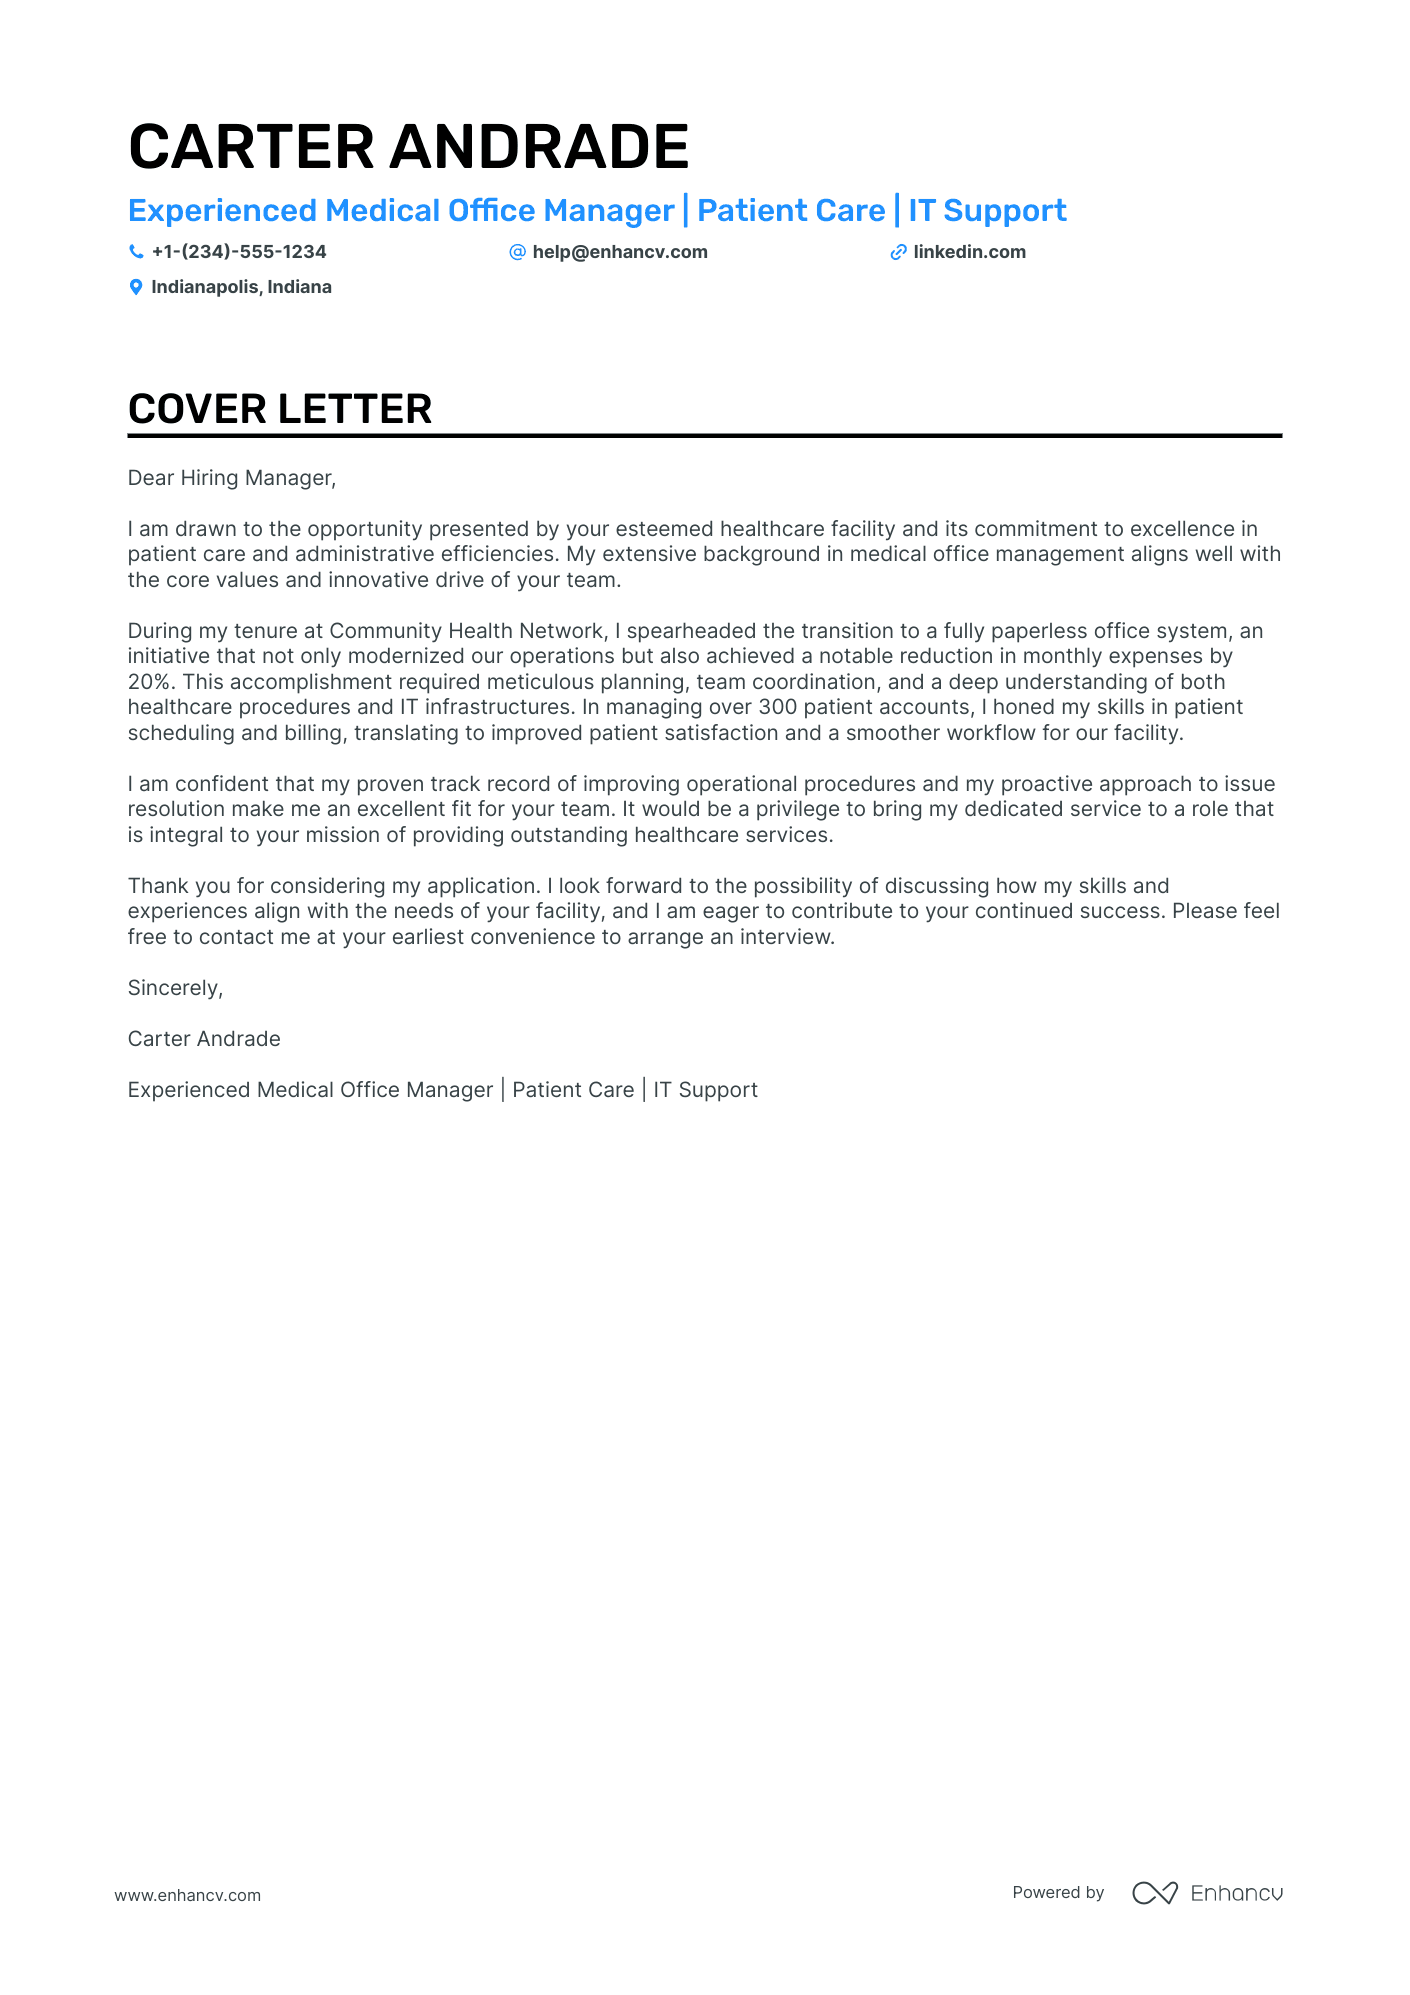 Medical Office Manager cover letter